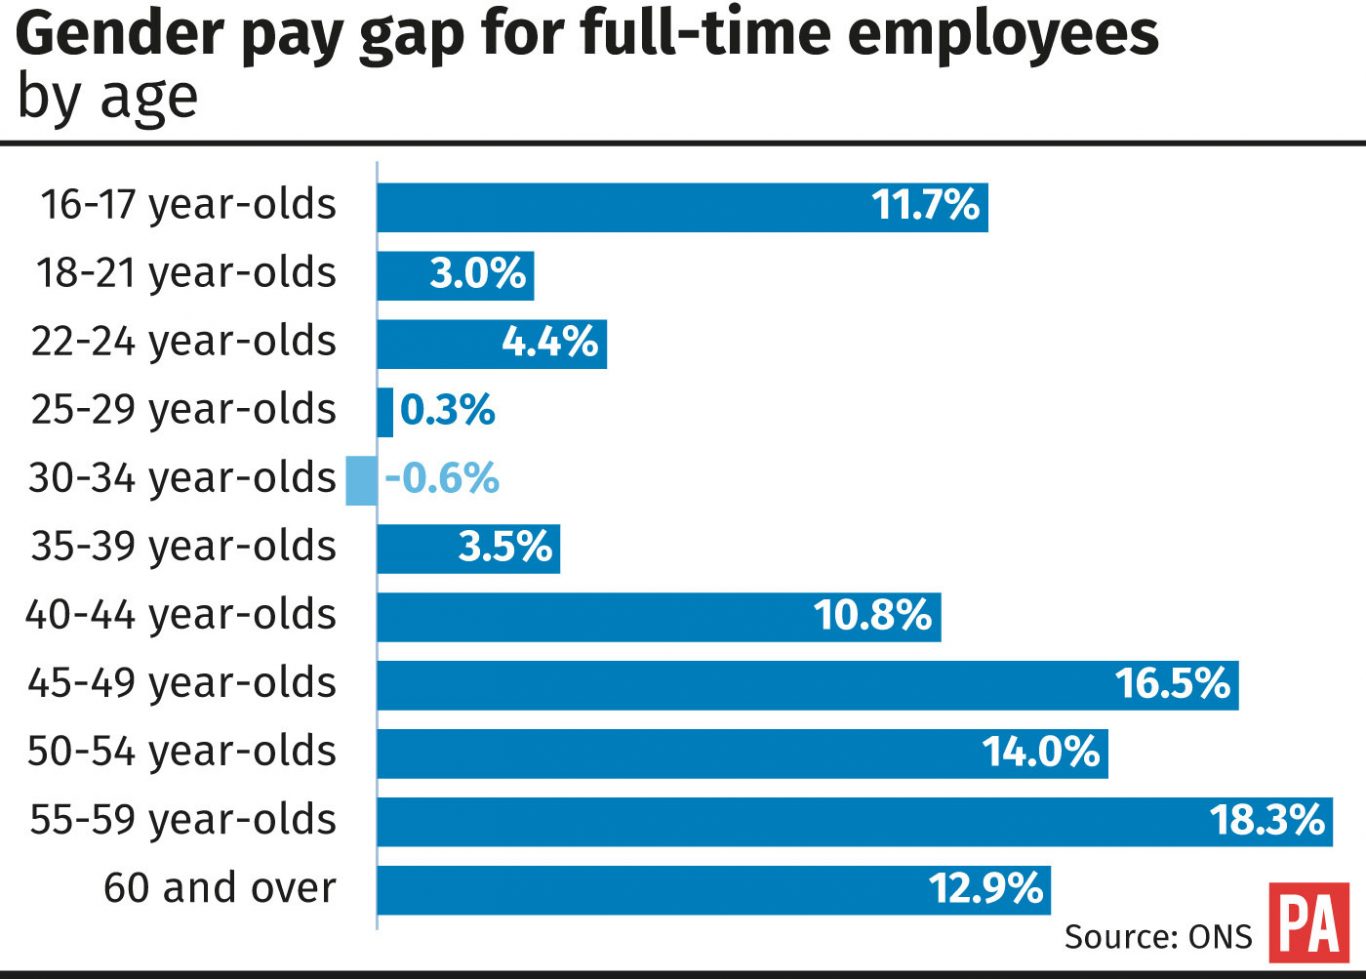 Gender pay gap for full-time employees by age